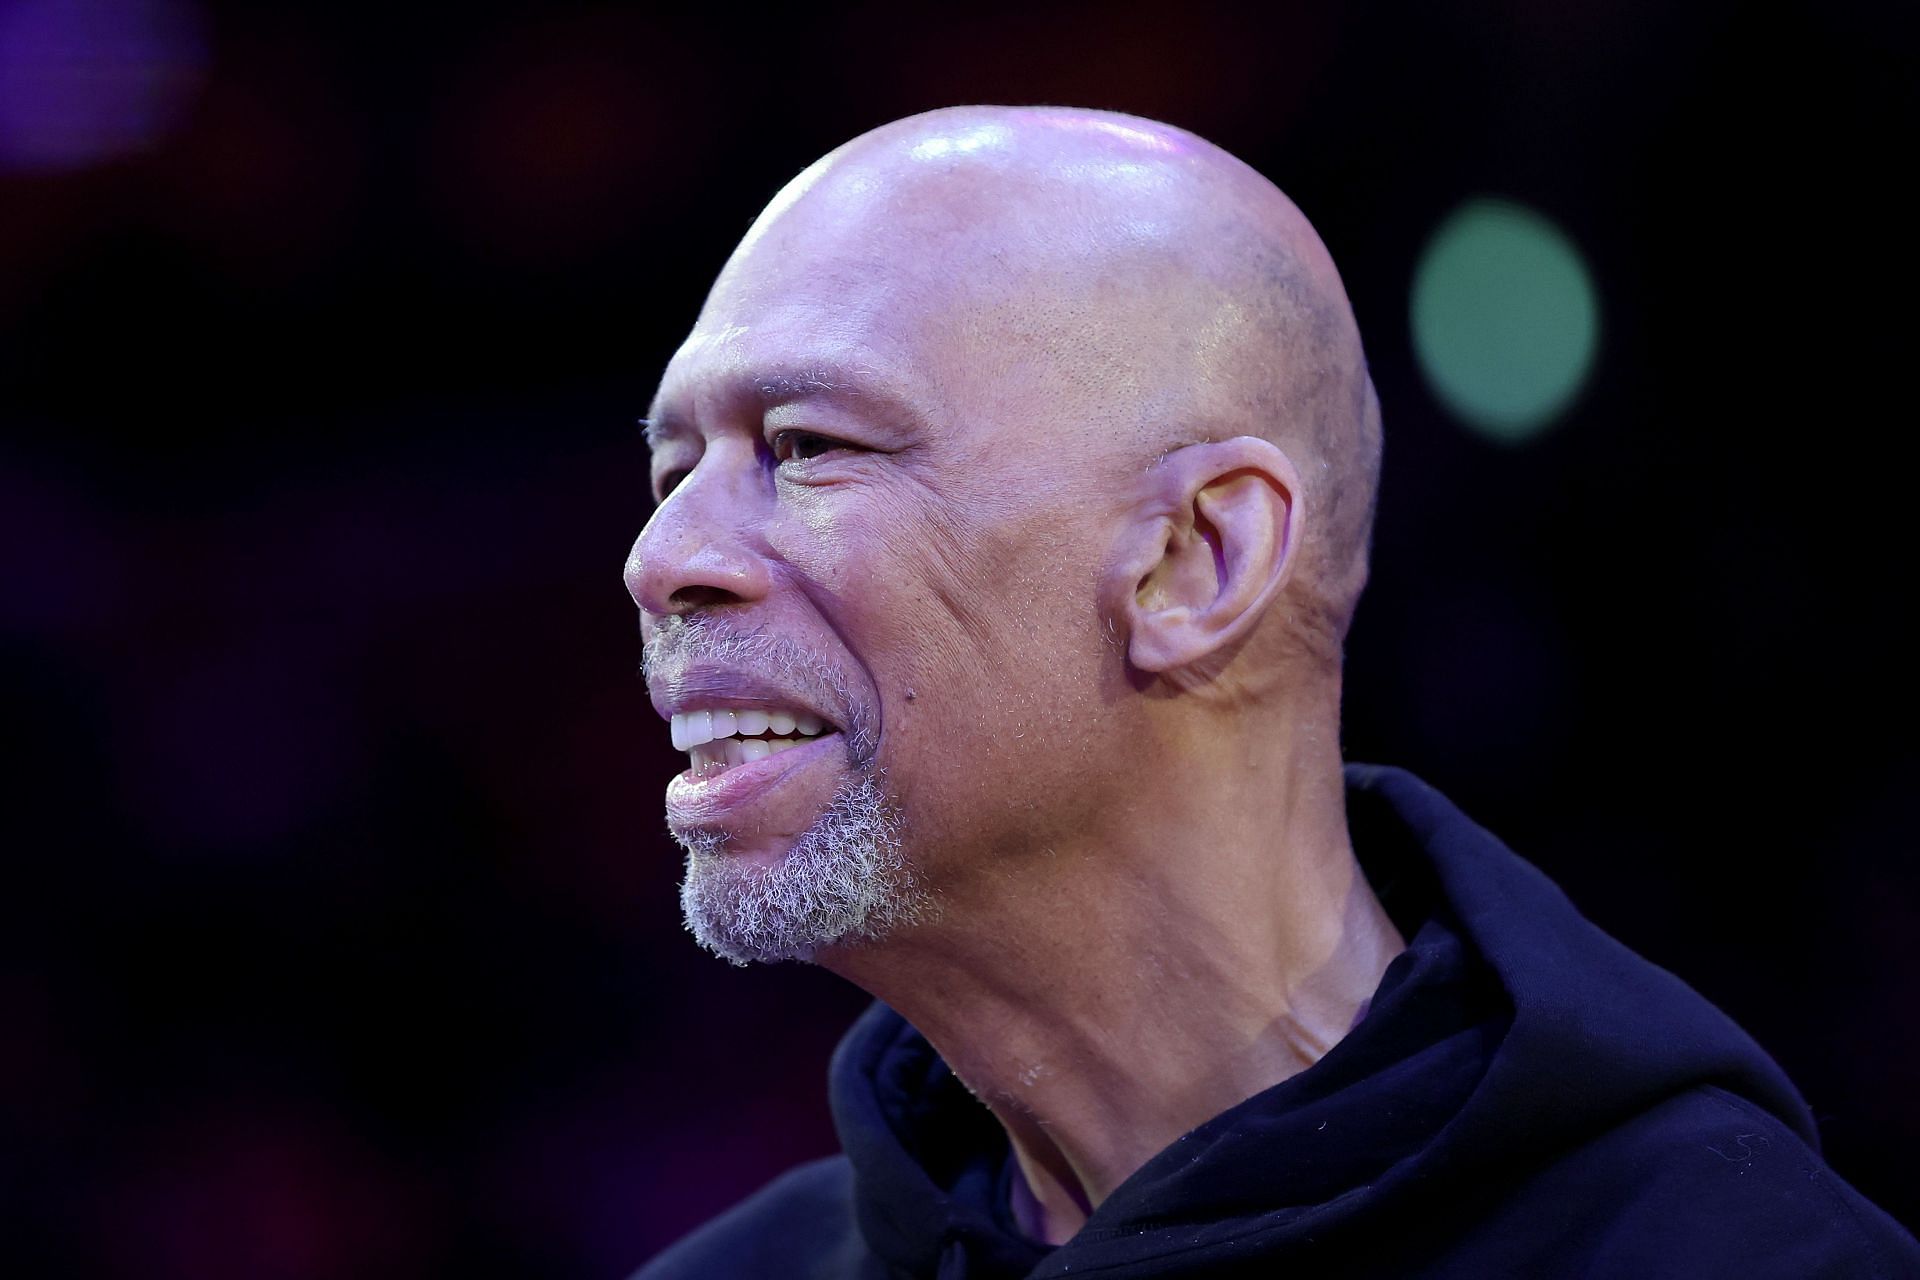 Kareem-Abdul Jabbar played for the Milwaukee Bucks and the LA Lakers in his career.